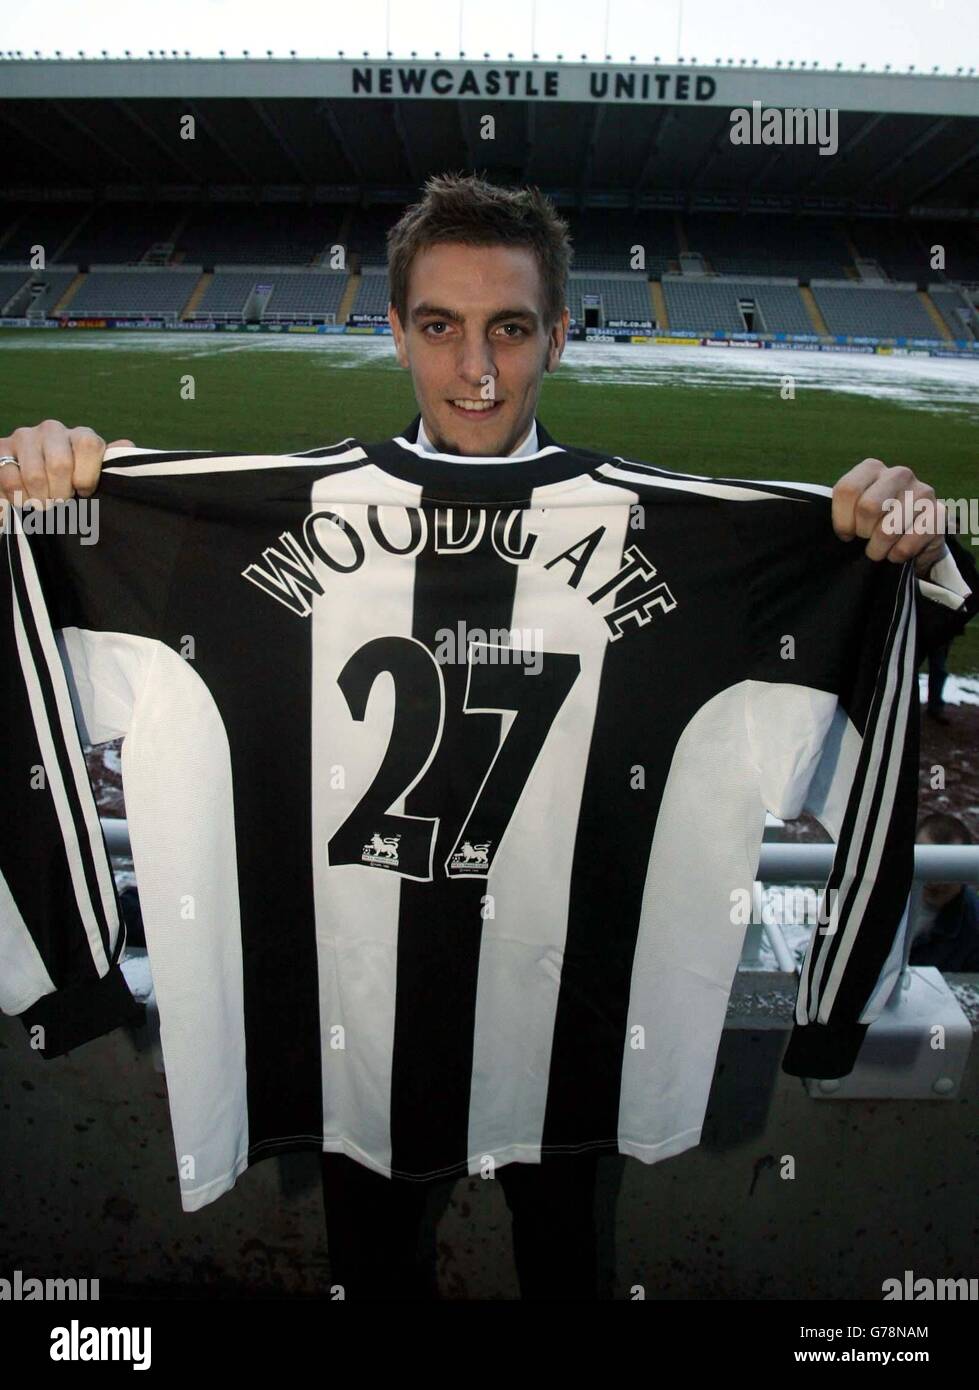 Newcastle United's new signing Jonathan Woodgate displays his new shirt at the club's St James' Park ground, following his 9m signing from Leeds United. Stock Photo